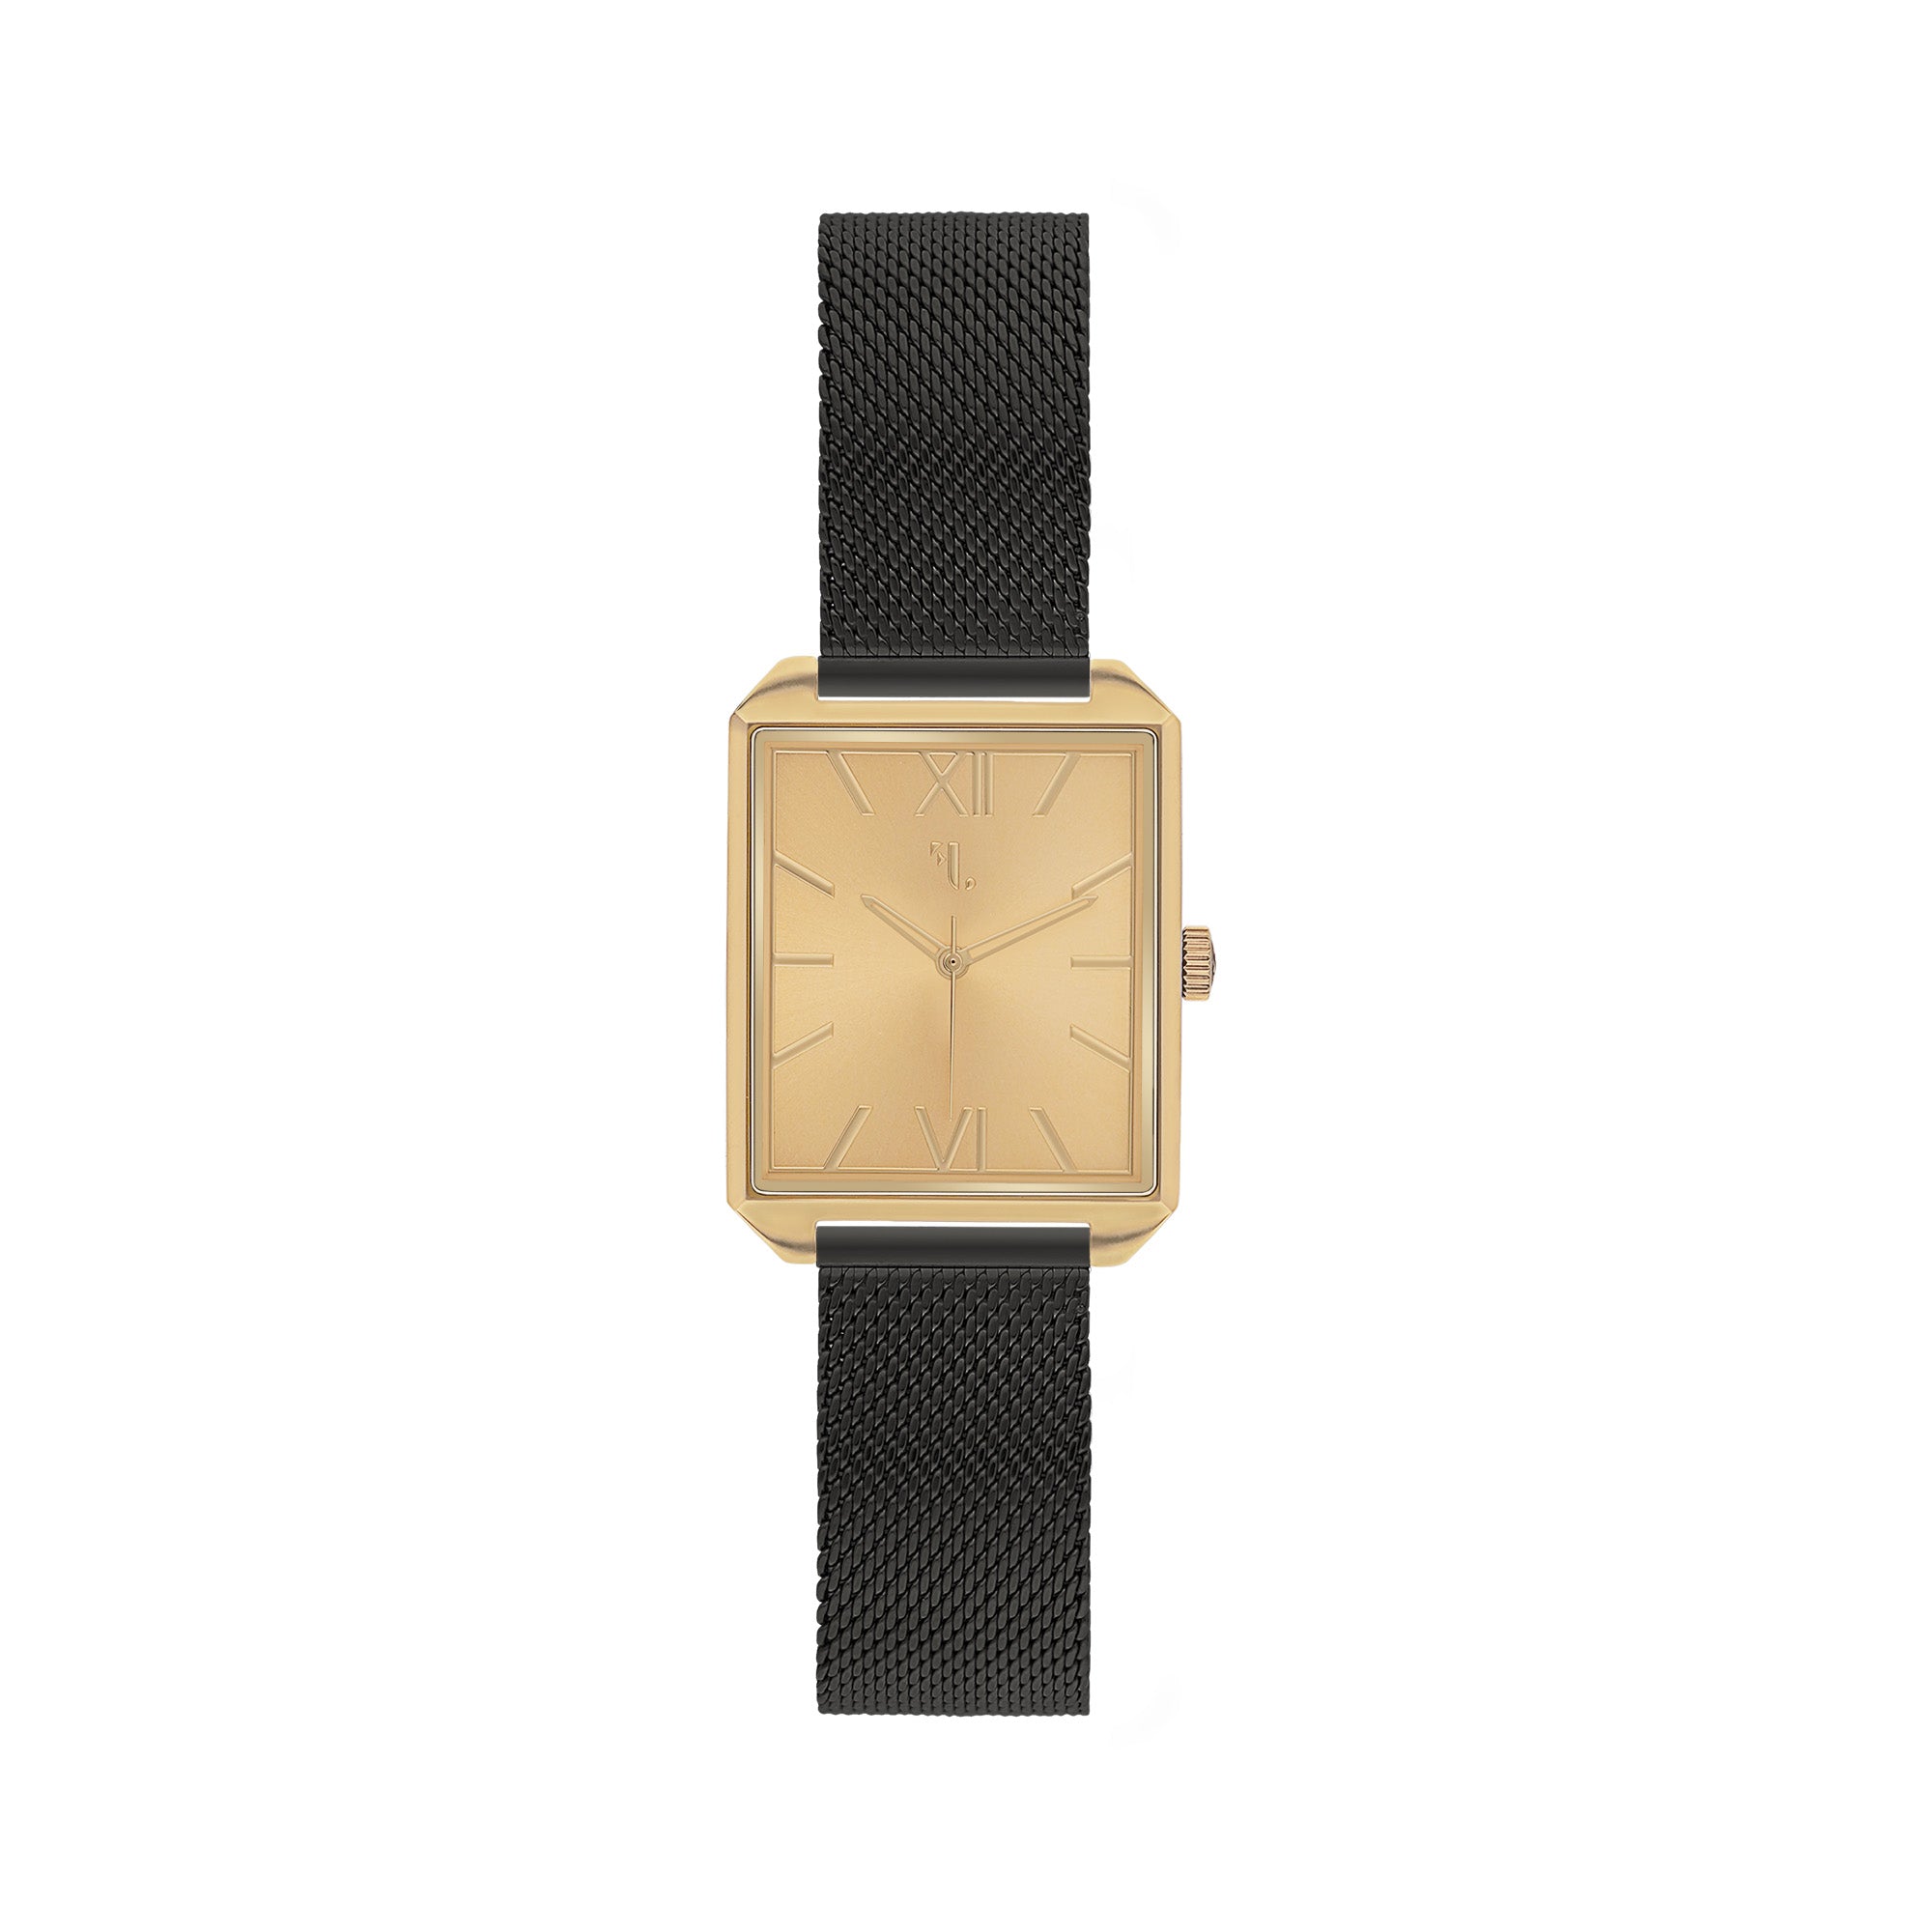 Men's monochrome gold watch with a modern square design and a sleek minimalist dial. This watch is designed in Montreal by Five Jwlry, it is equipped with a quartz mechanism, a black mesh band and it has a water resistance of 5ATM!